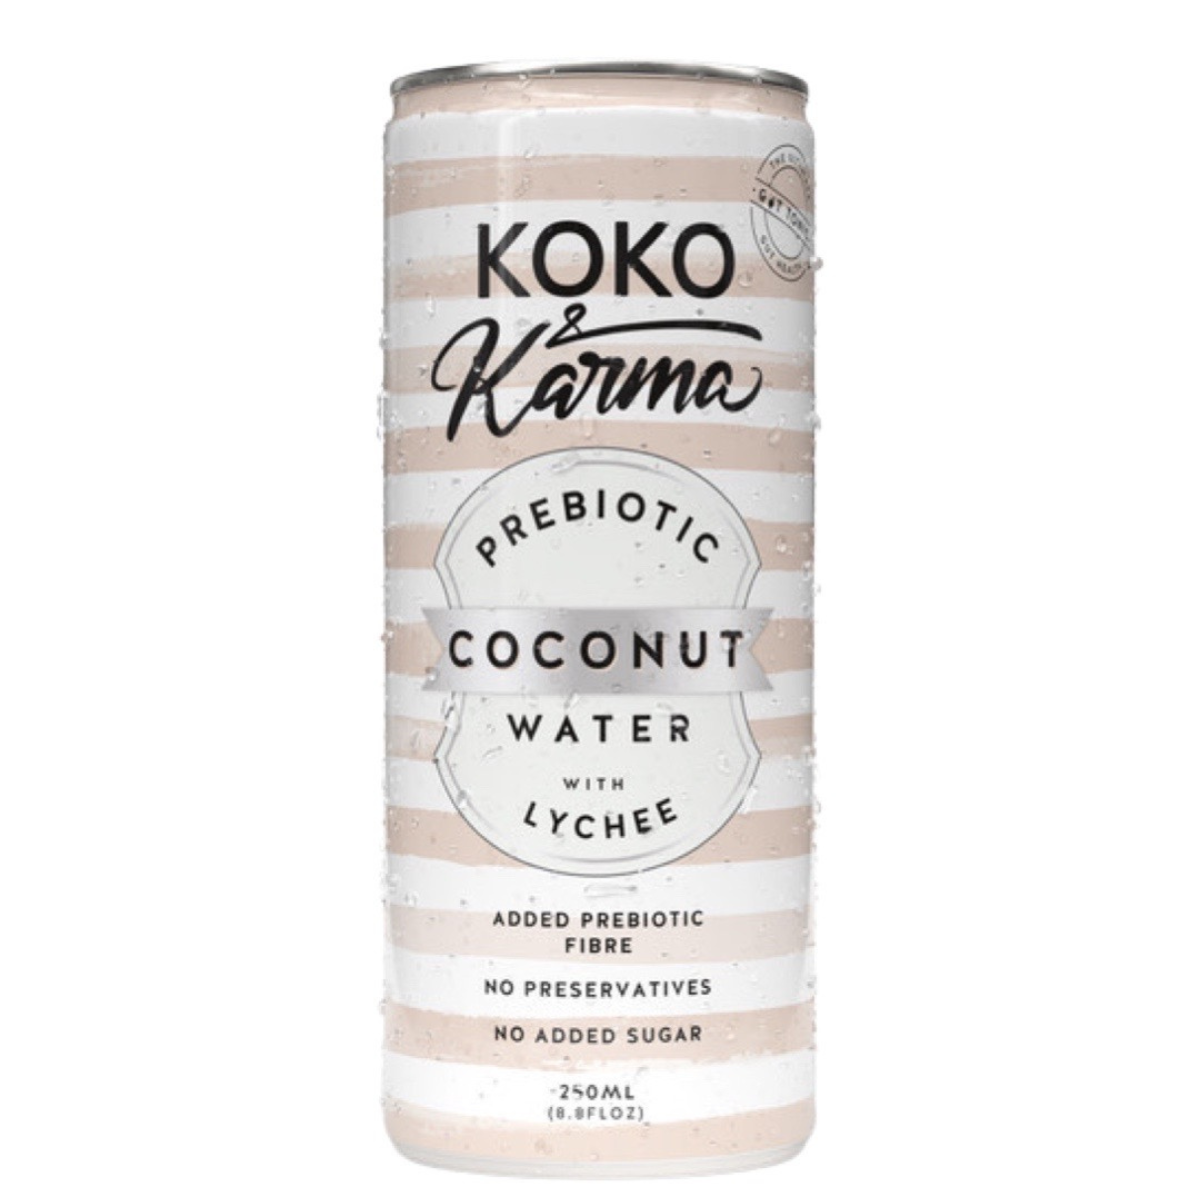 Coconut water with Prebiotic Dietary Fibre & a touch of Lychee